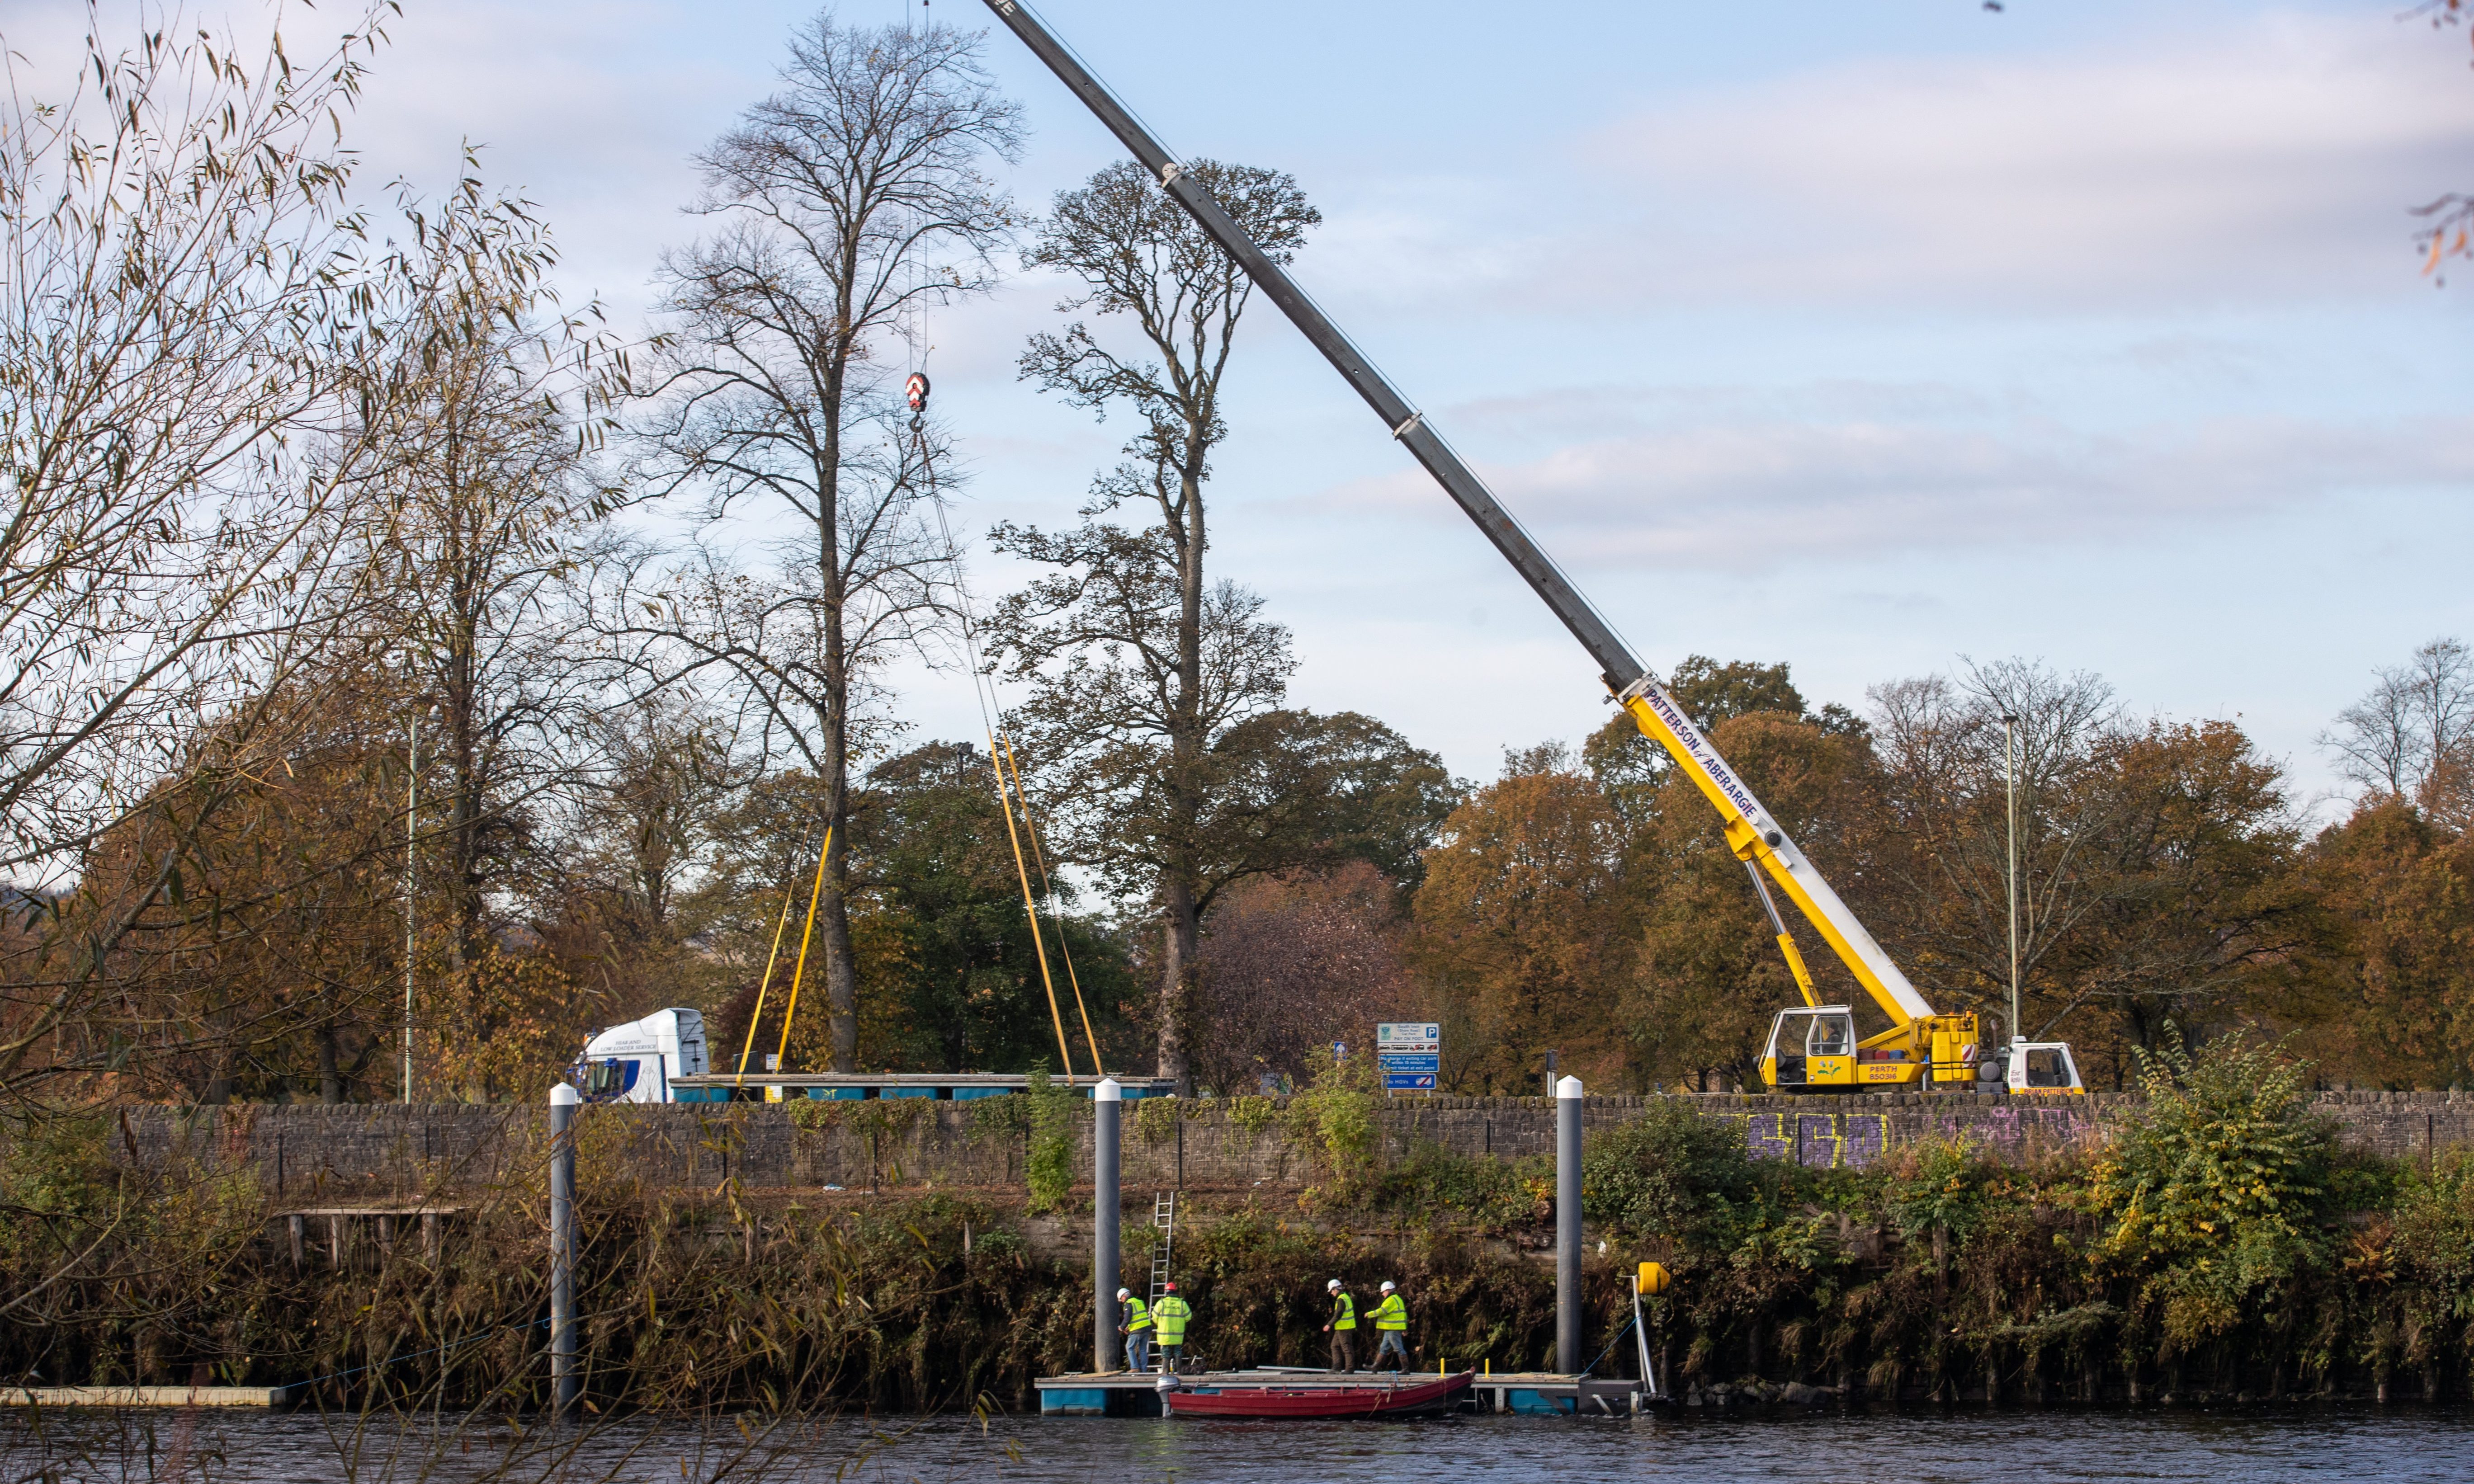 Crews dismantled the walkway at the Fergusson Gallery pontoons on Thursday morning.